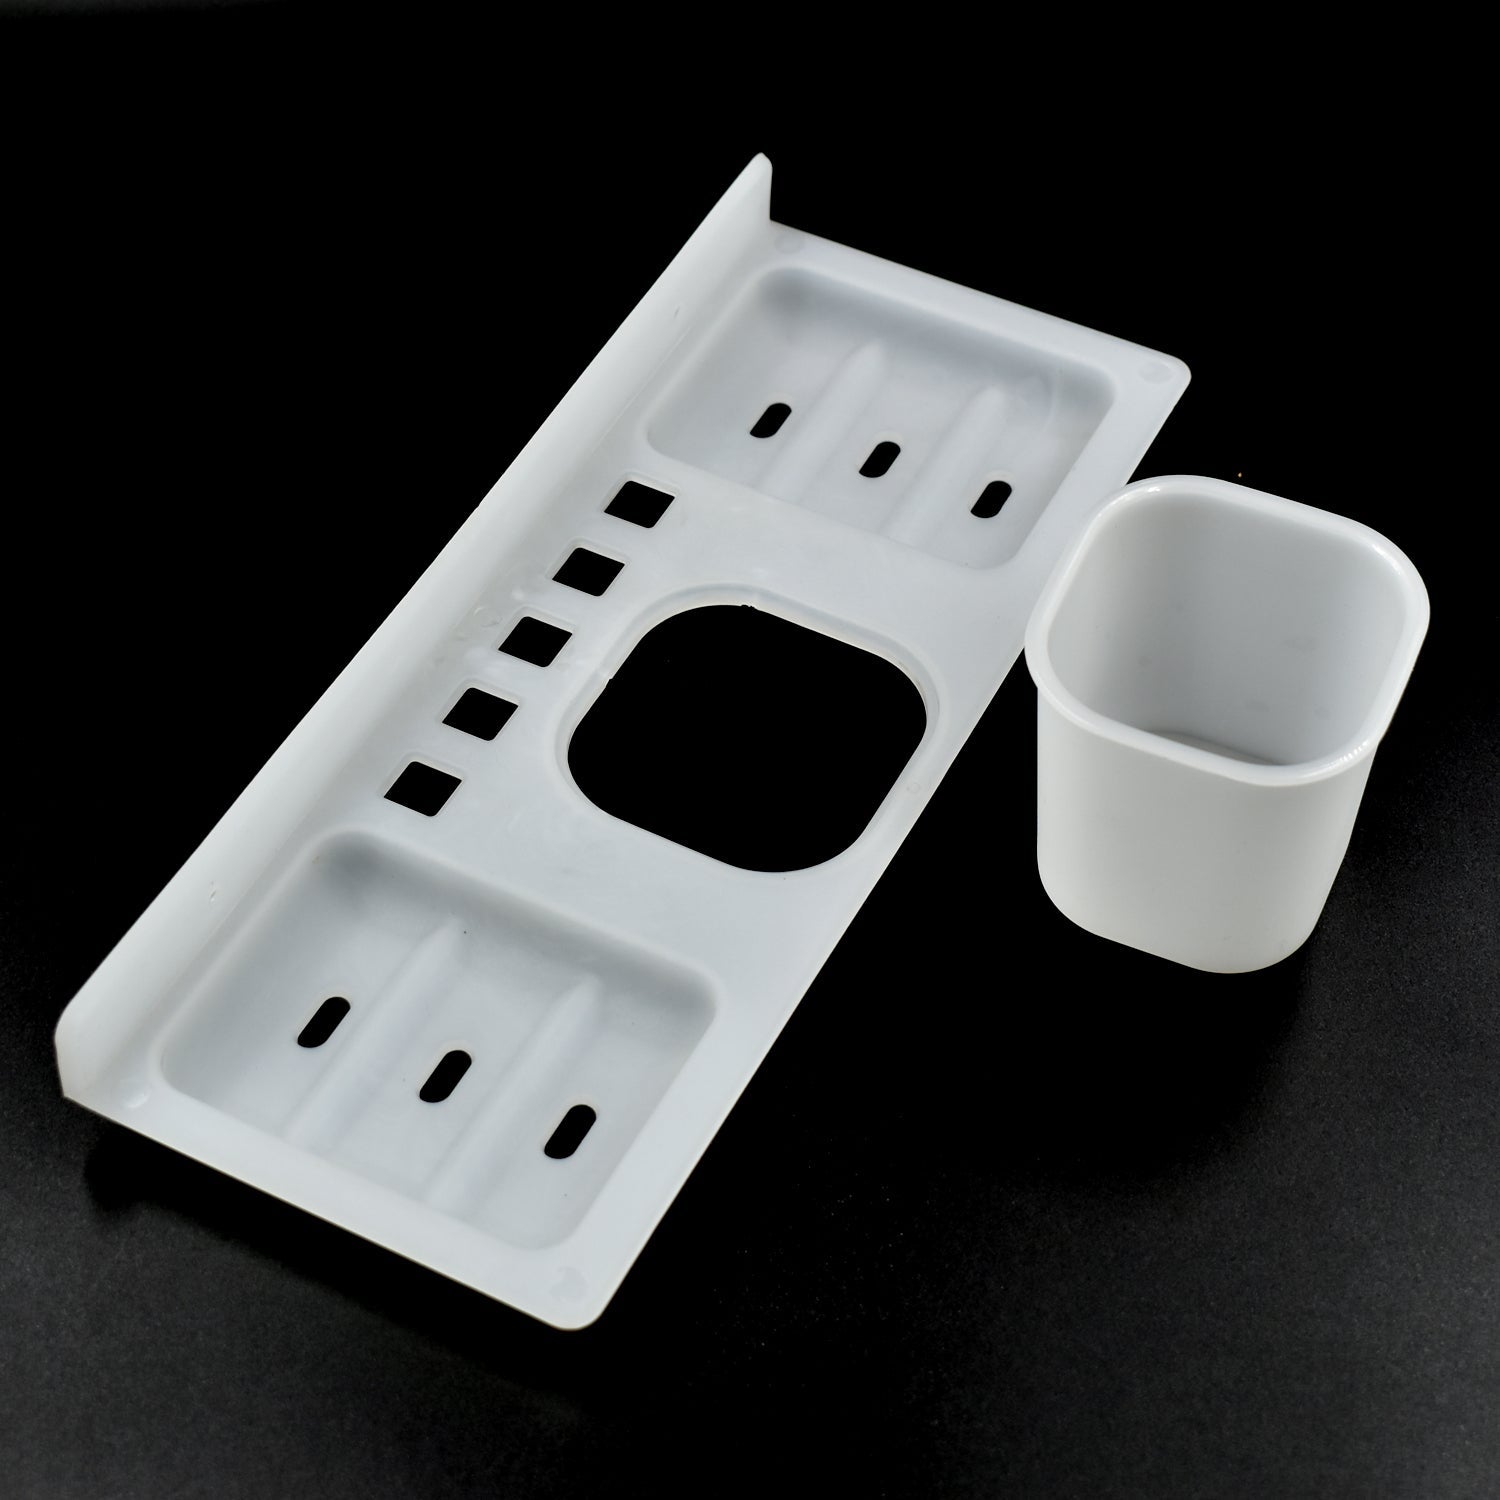 4777 4 in 1 Plastic Soap Dish and plastic soap dish tray used in bathroom and kitchen purposes.